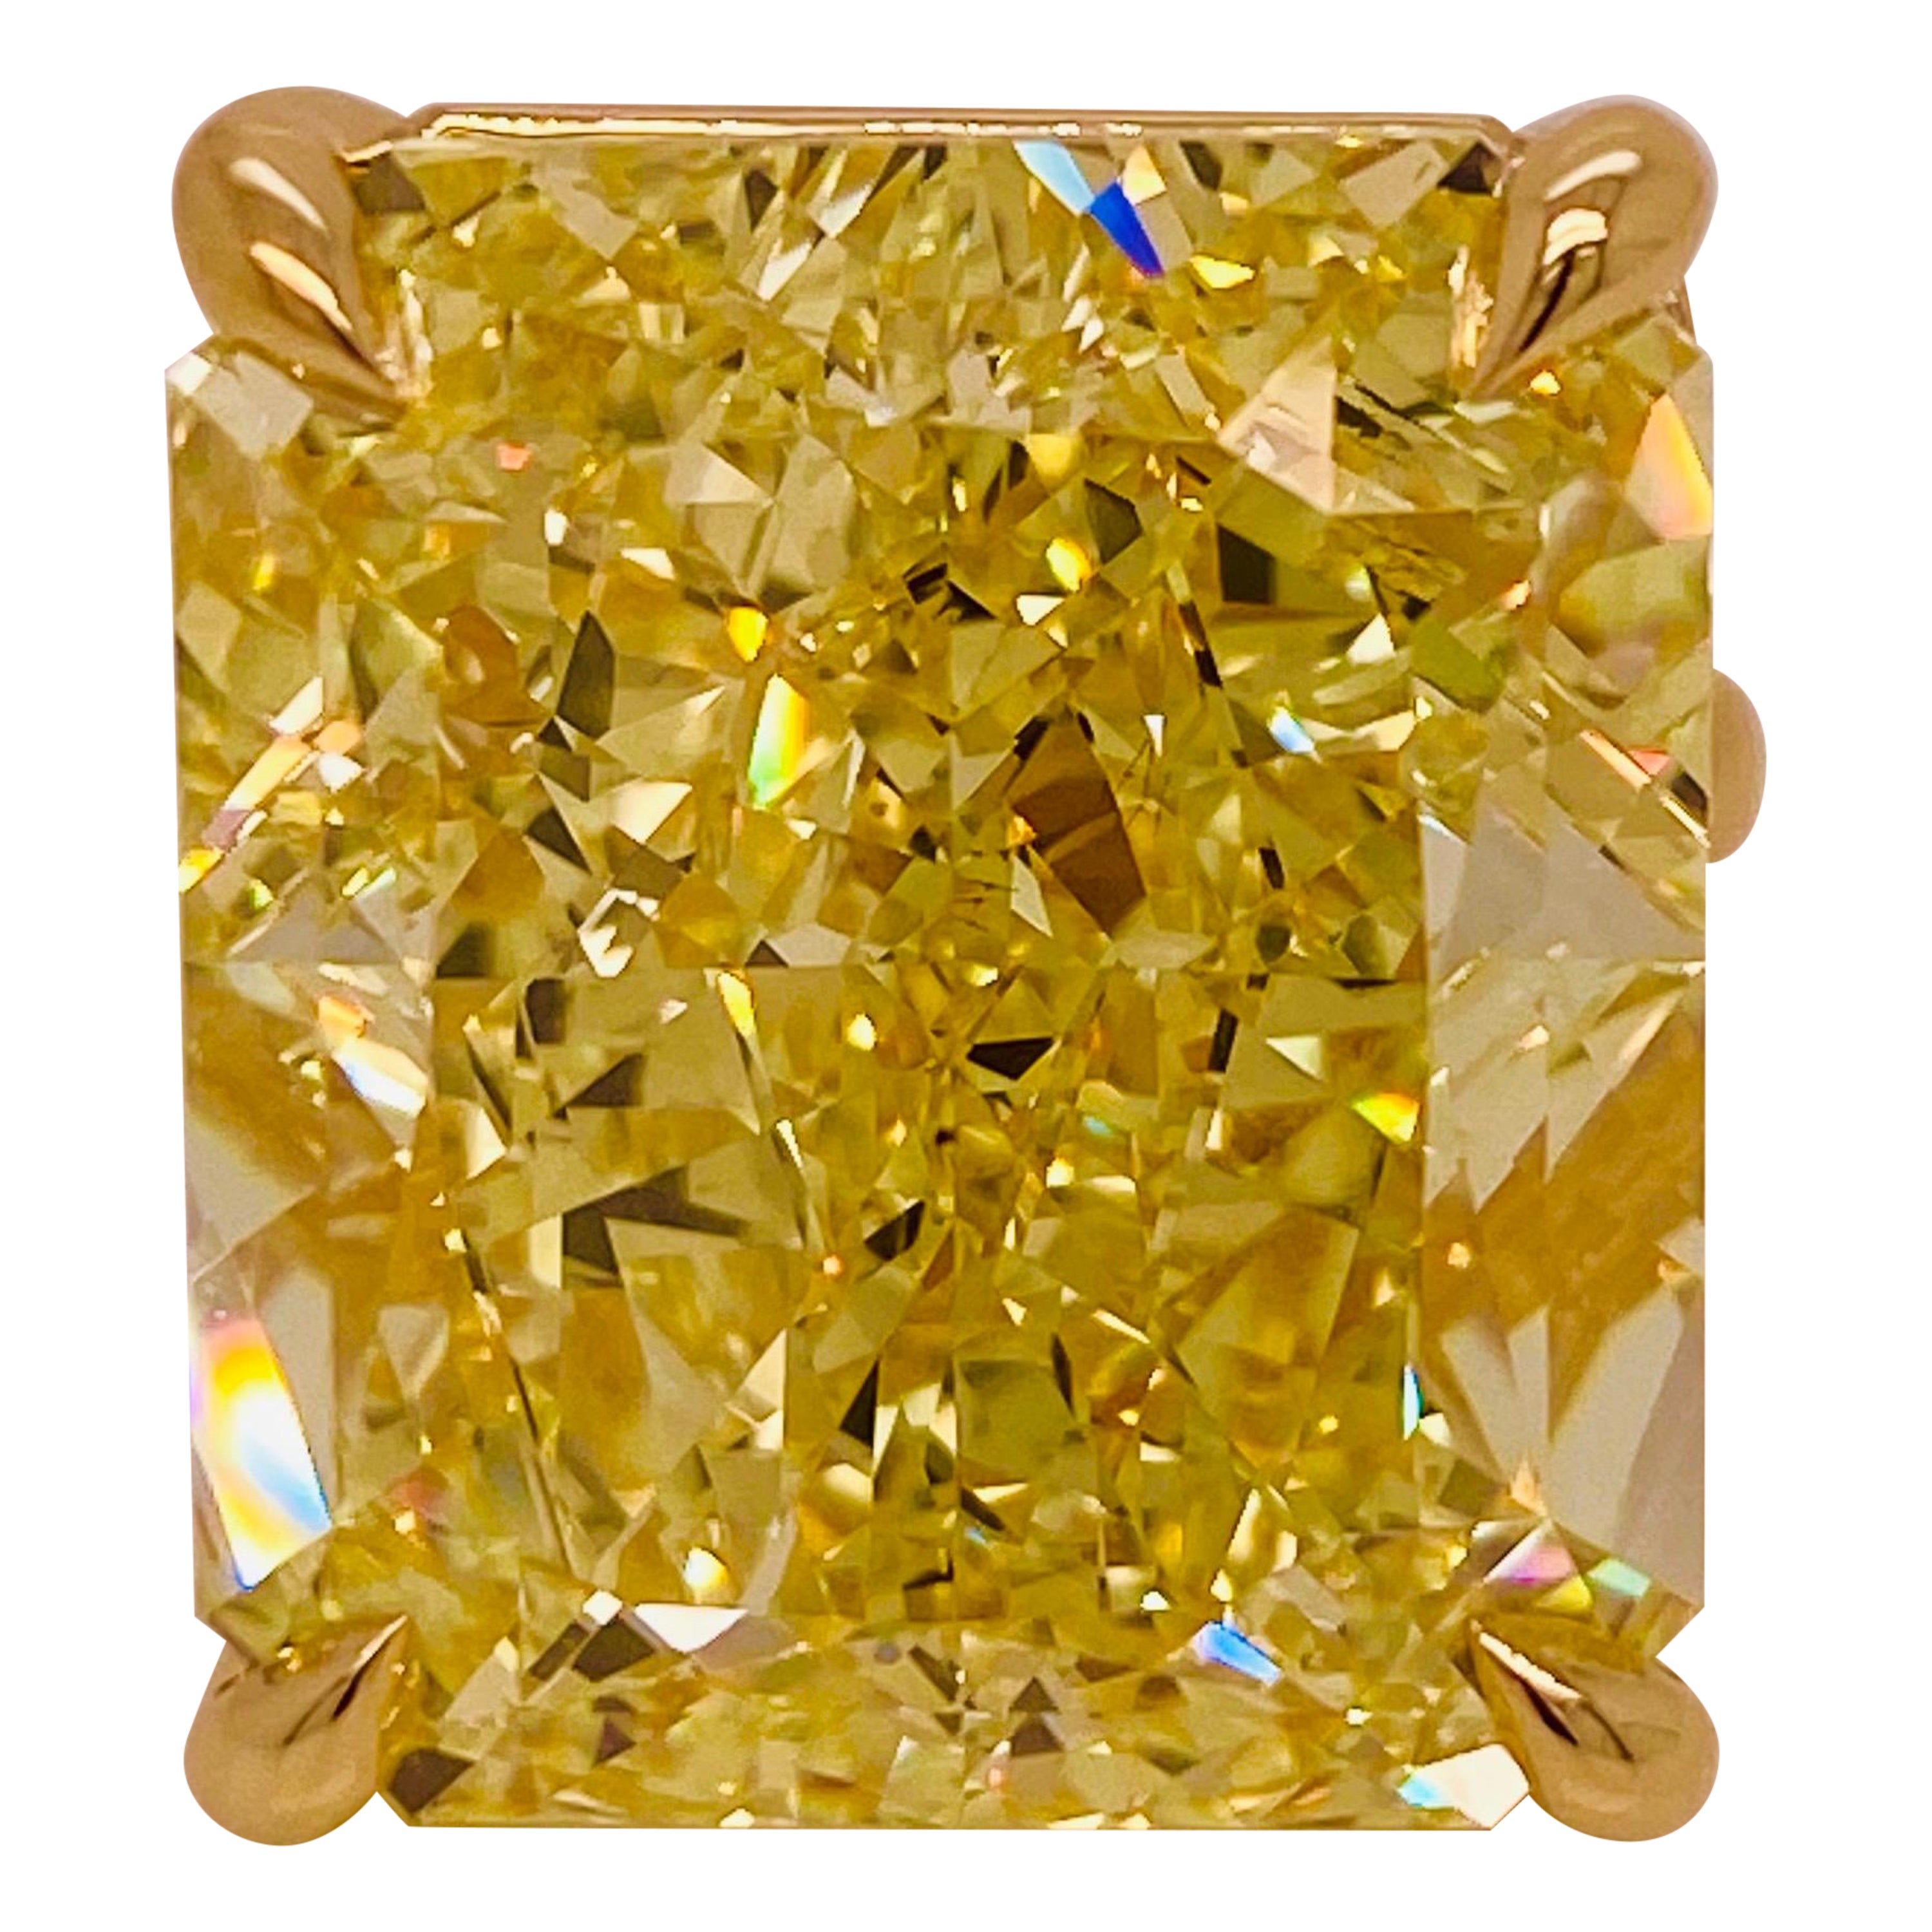 From the Emilio Jewelry Museum Vault,
A one of a kind 41.00ct + Fancy Intense Radiant Yellow Diamond, of mind blowing color, and fire! We created a simple mounting to be worn everyday. Can be redesigned by our team.